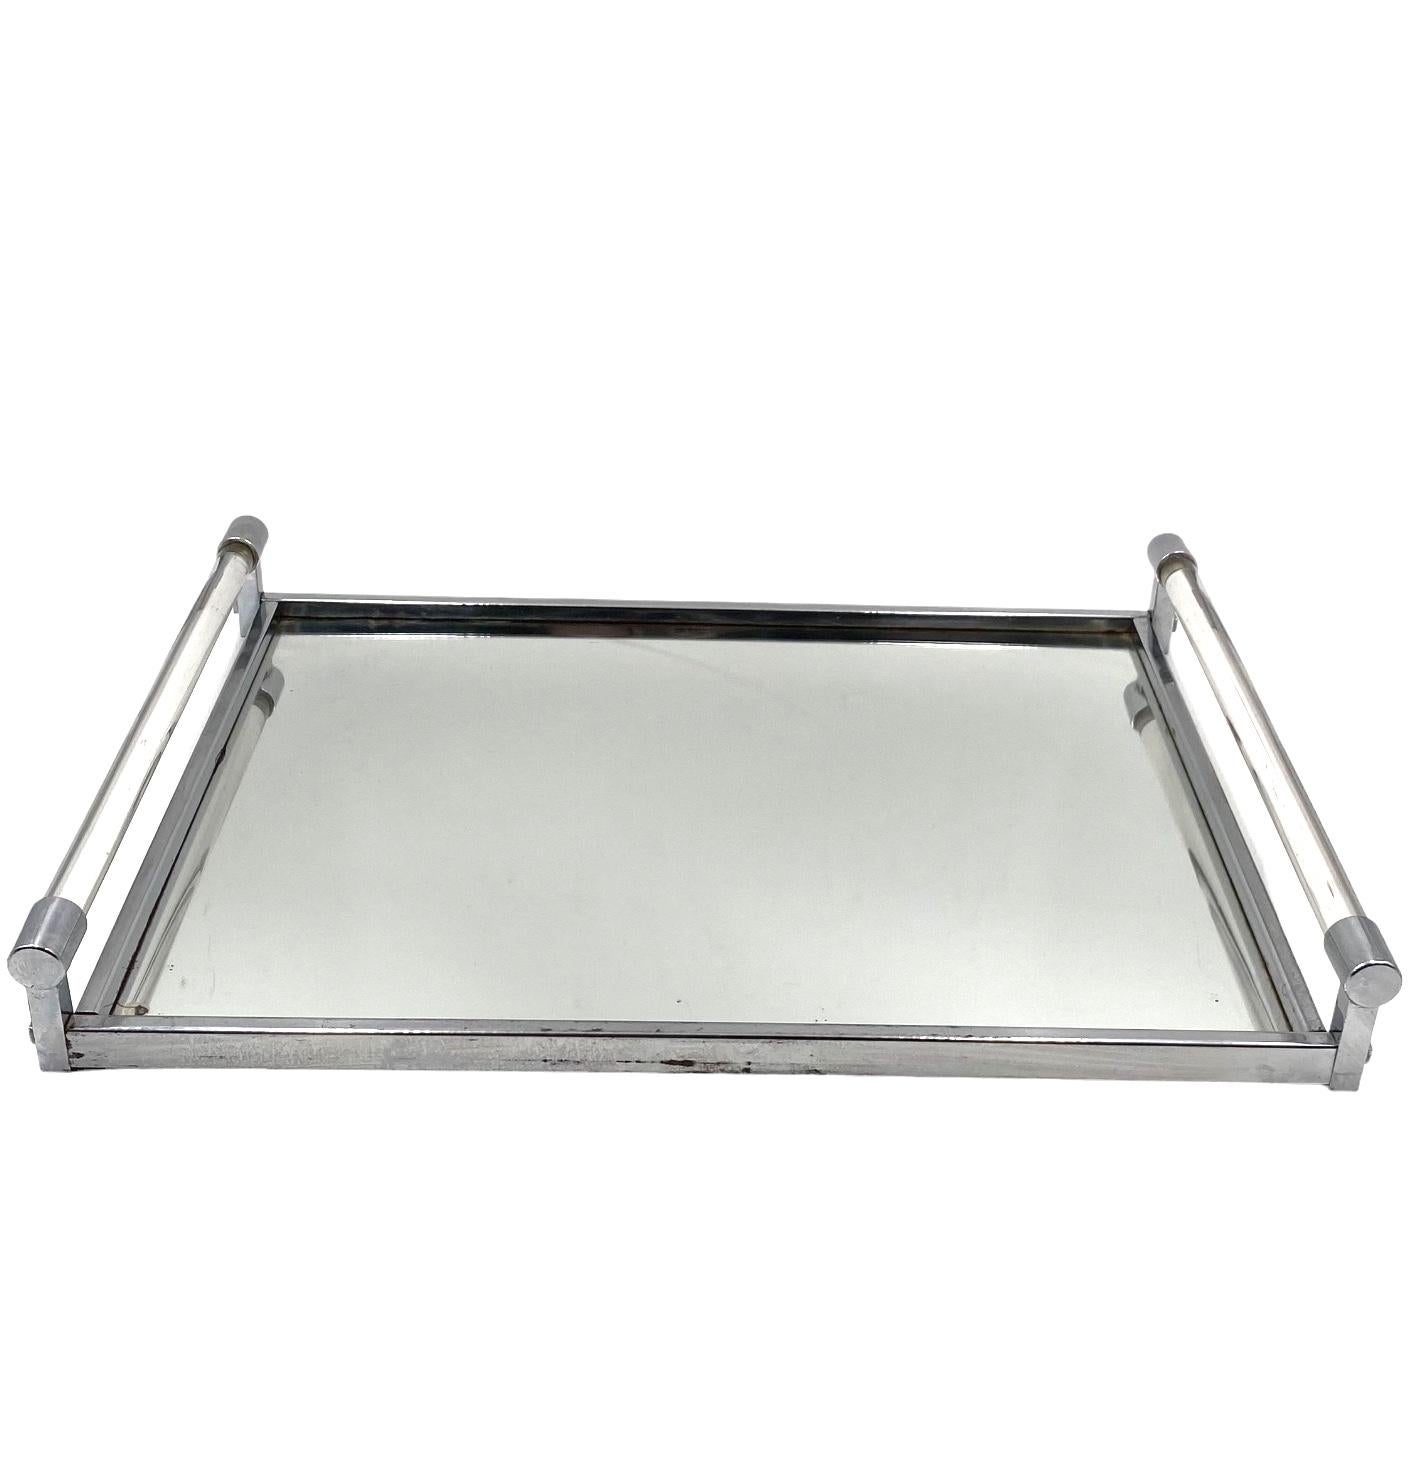 Jacques Adnet, Modernist lucite mirrored tray, Maison Adnet, France 1940s For Sale 6